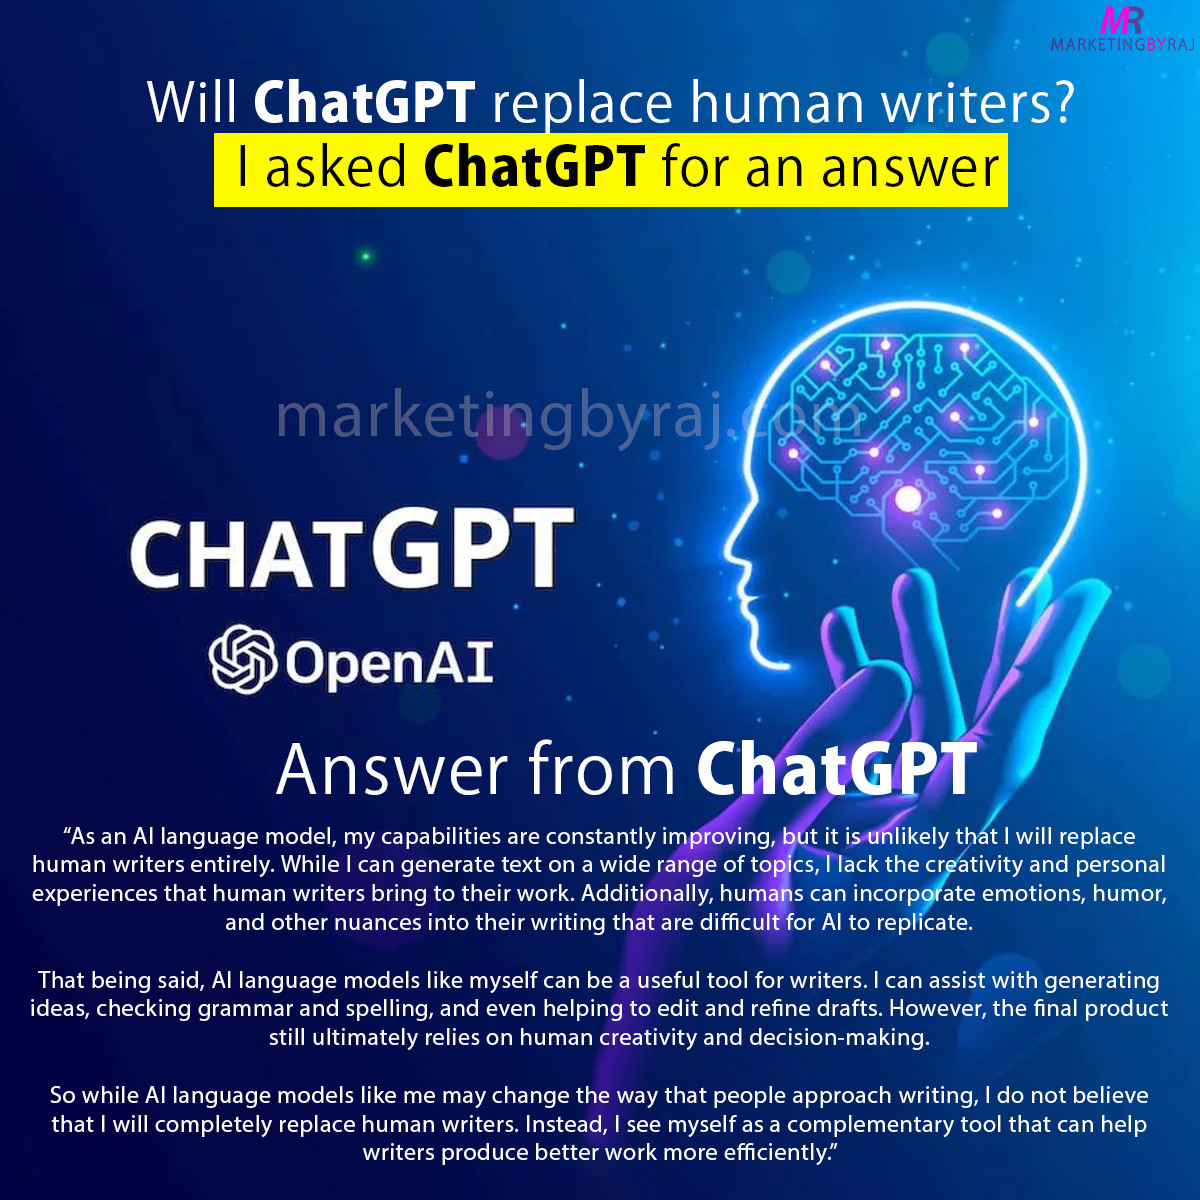 Rajesh Kumar, a well-known Influencer, Photographer, & Digital Marketer inquired ChatGPT if it could supplant human writers